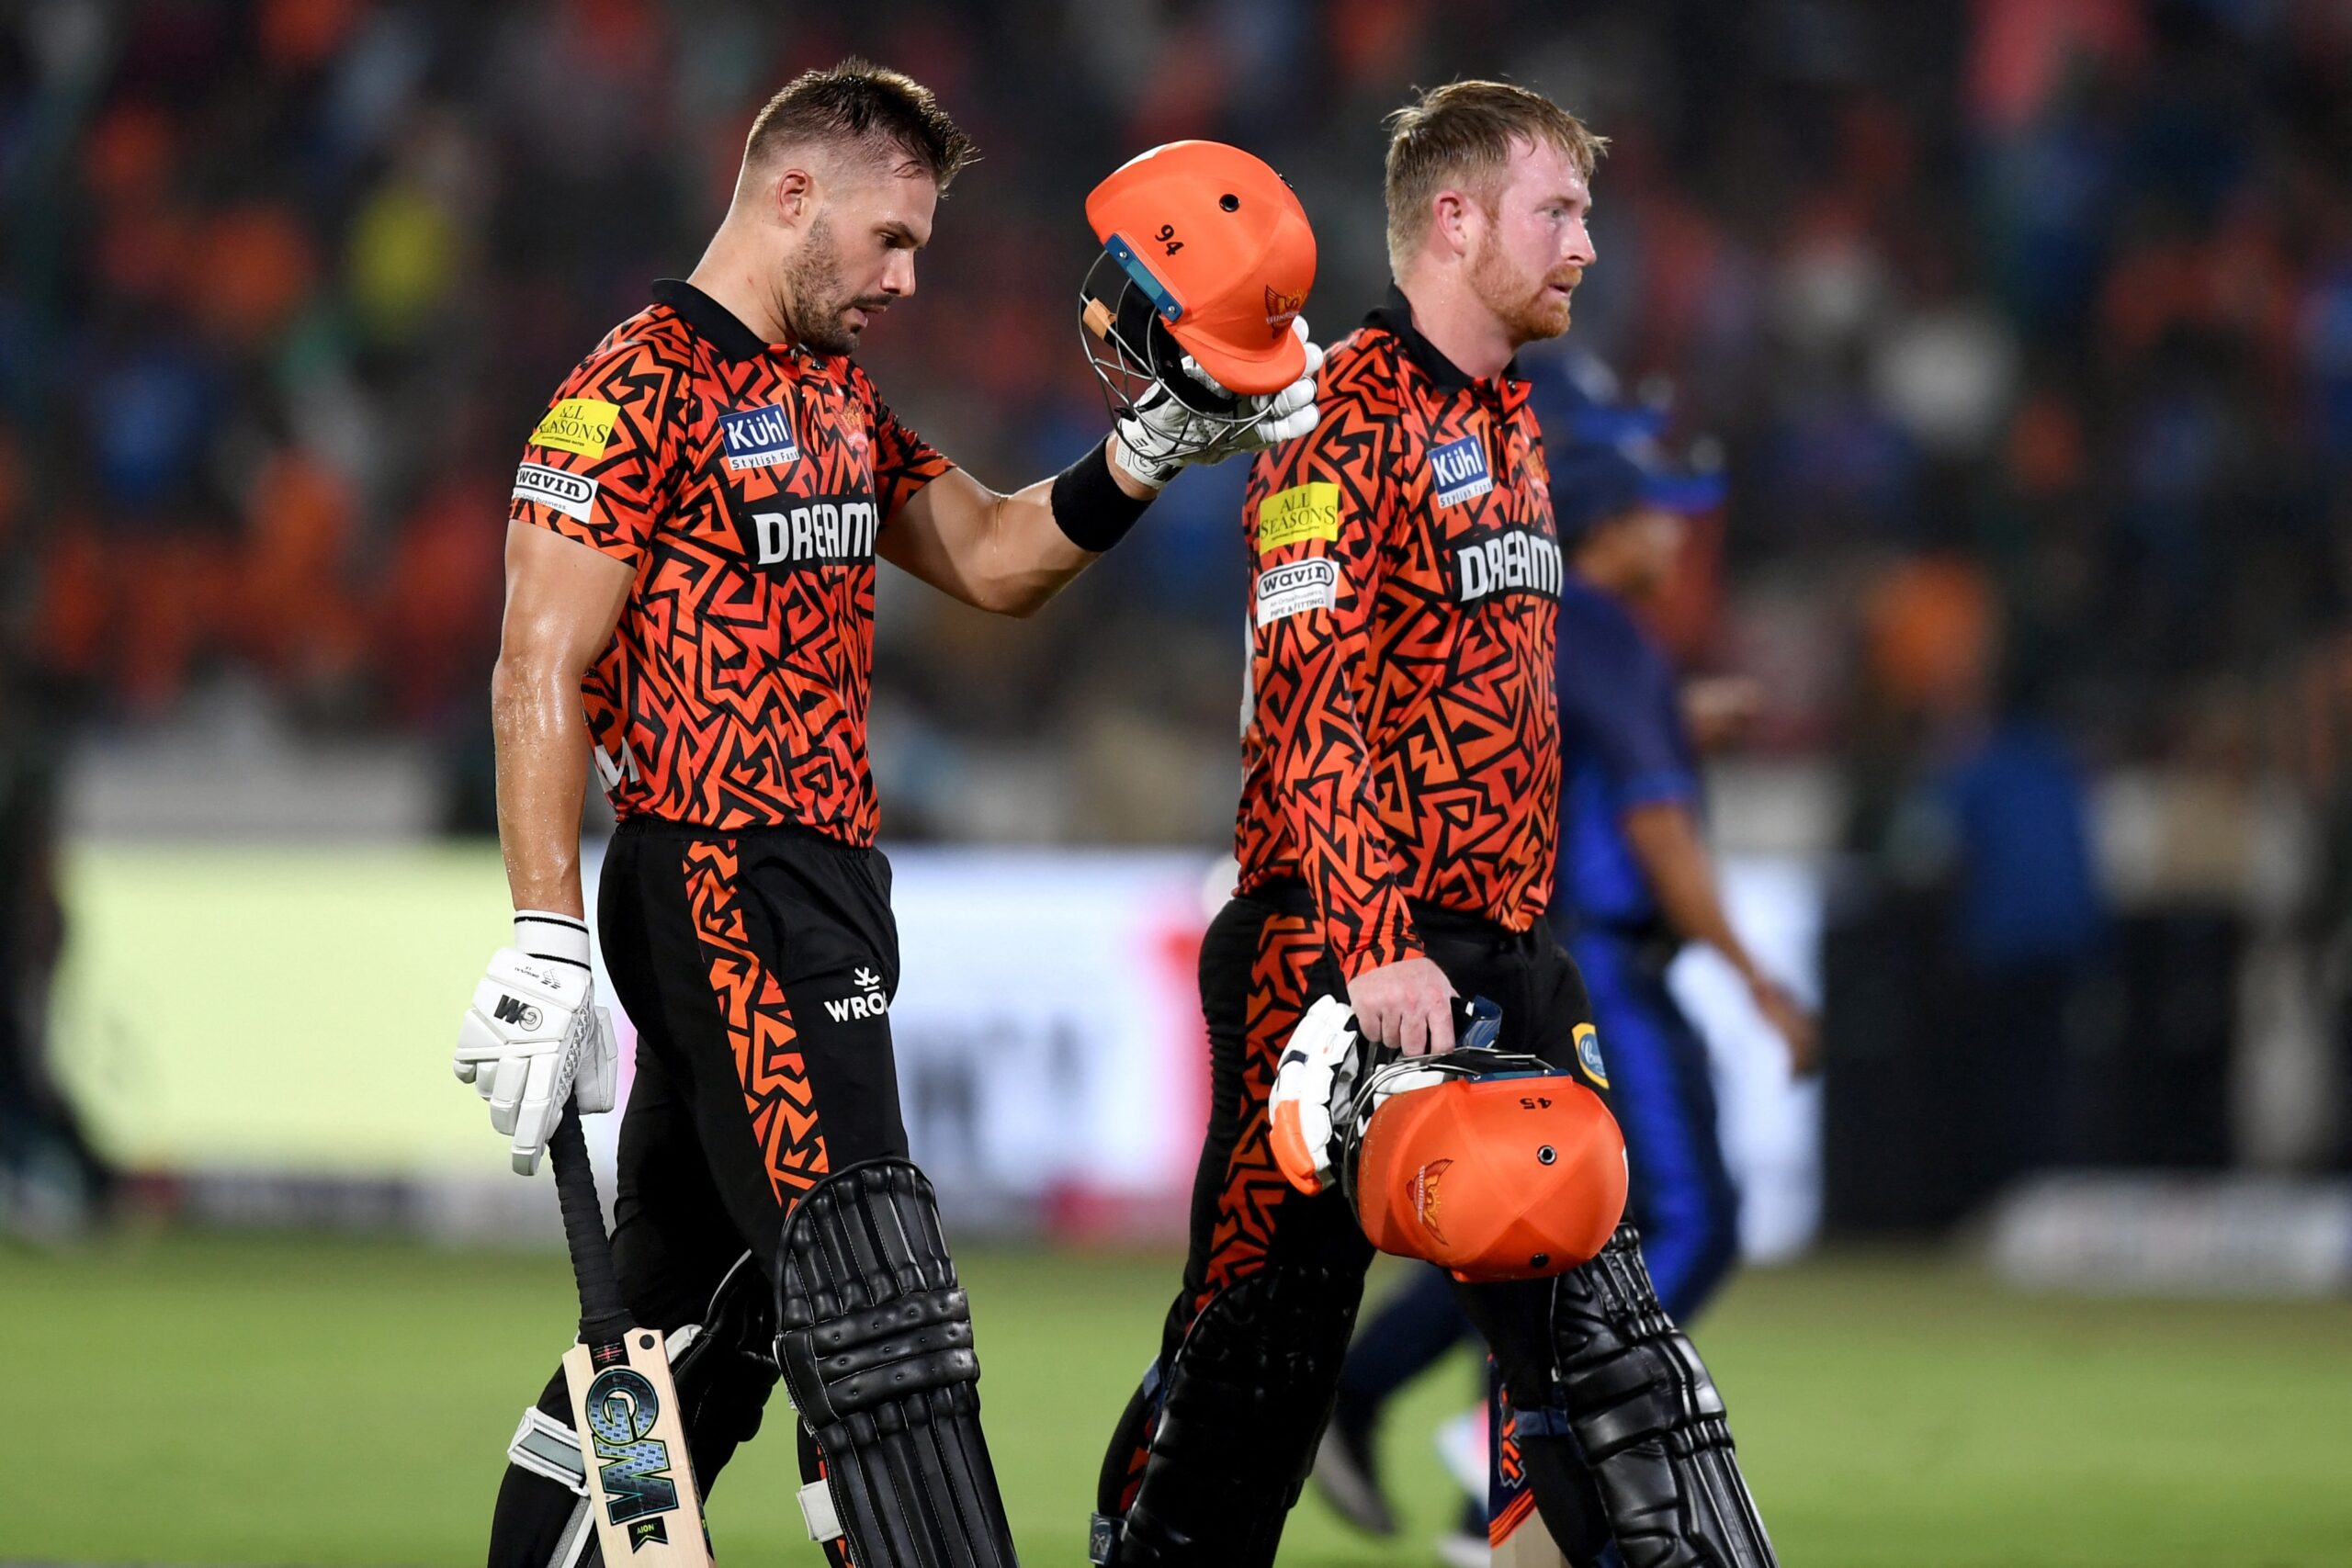 SRH’s 277/3 Is Not The Highest Score In T20 Format – A Look At Top Team Totals